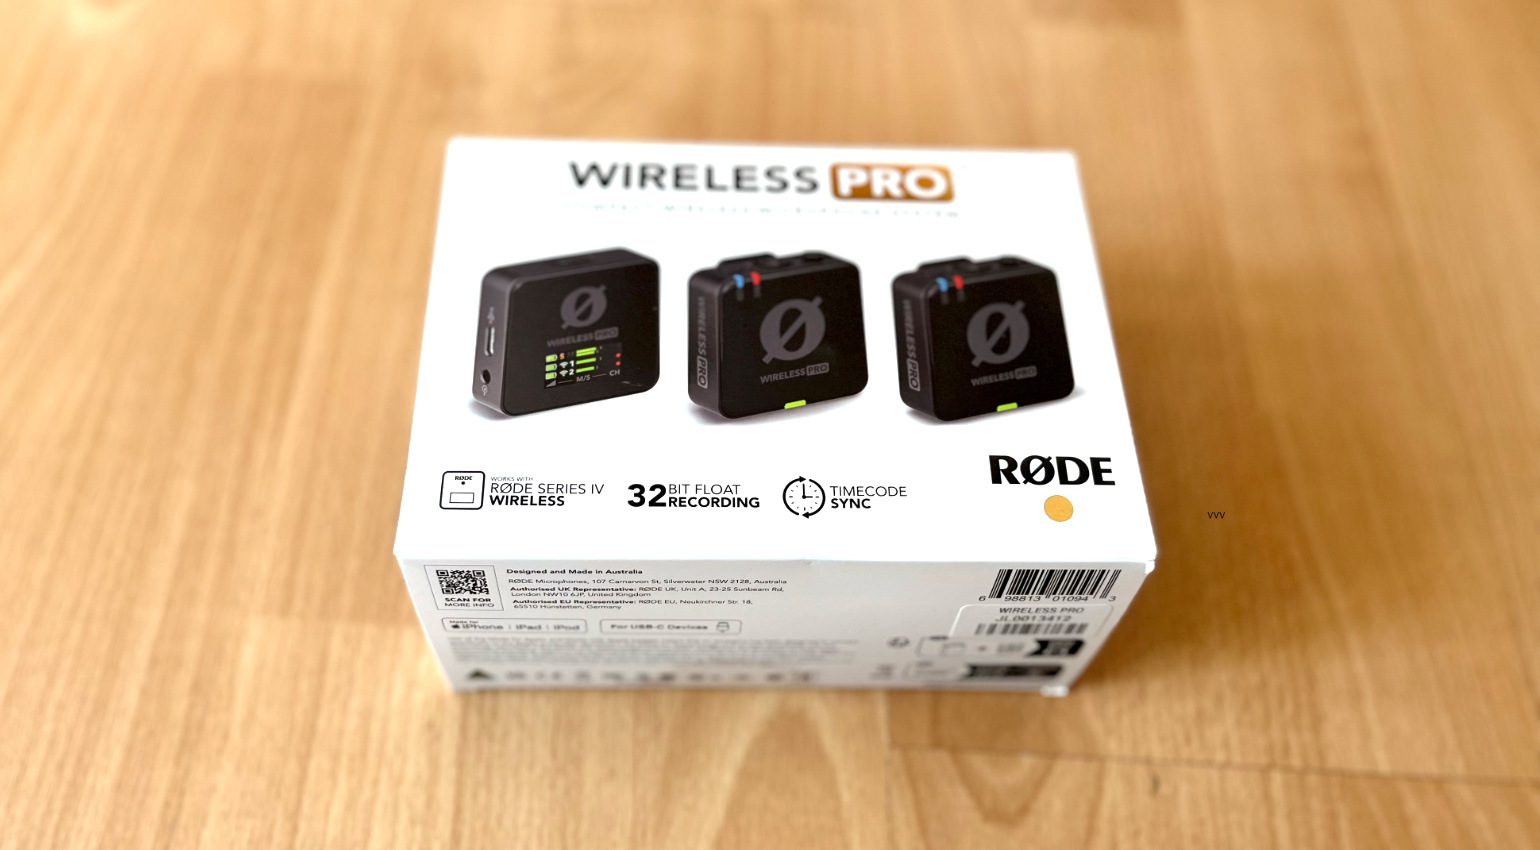 RODE Wireless Pro review